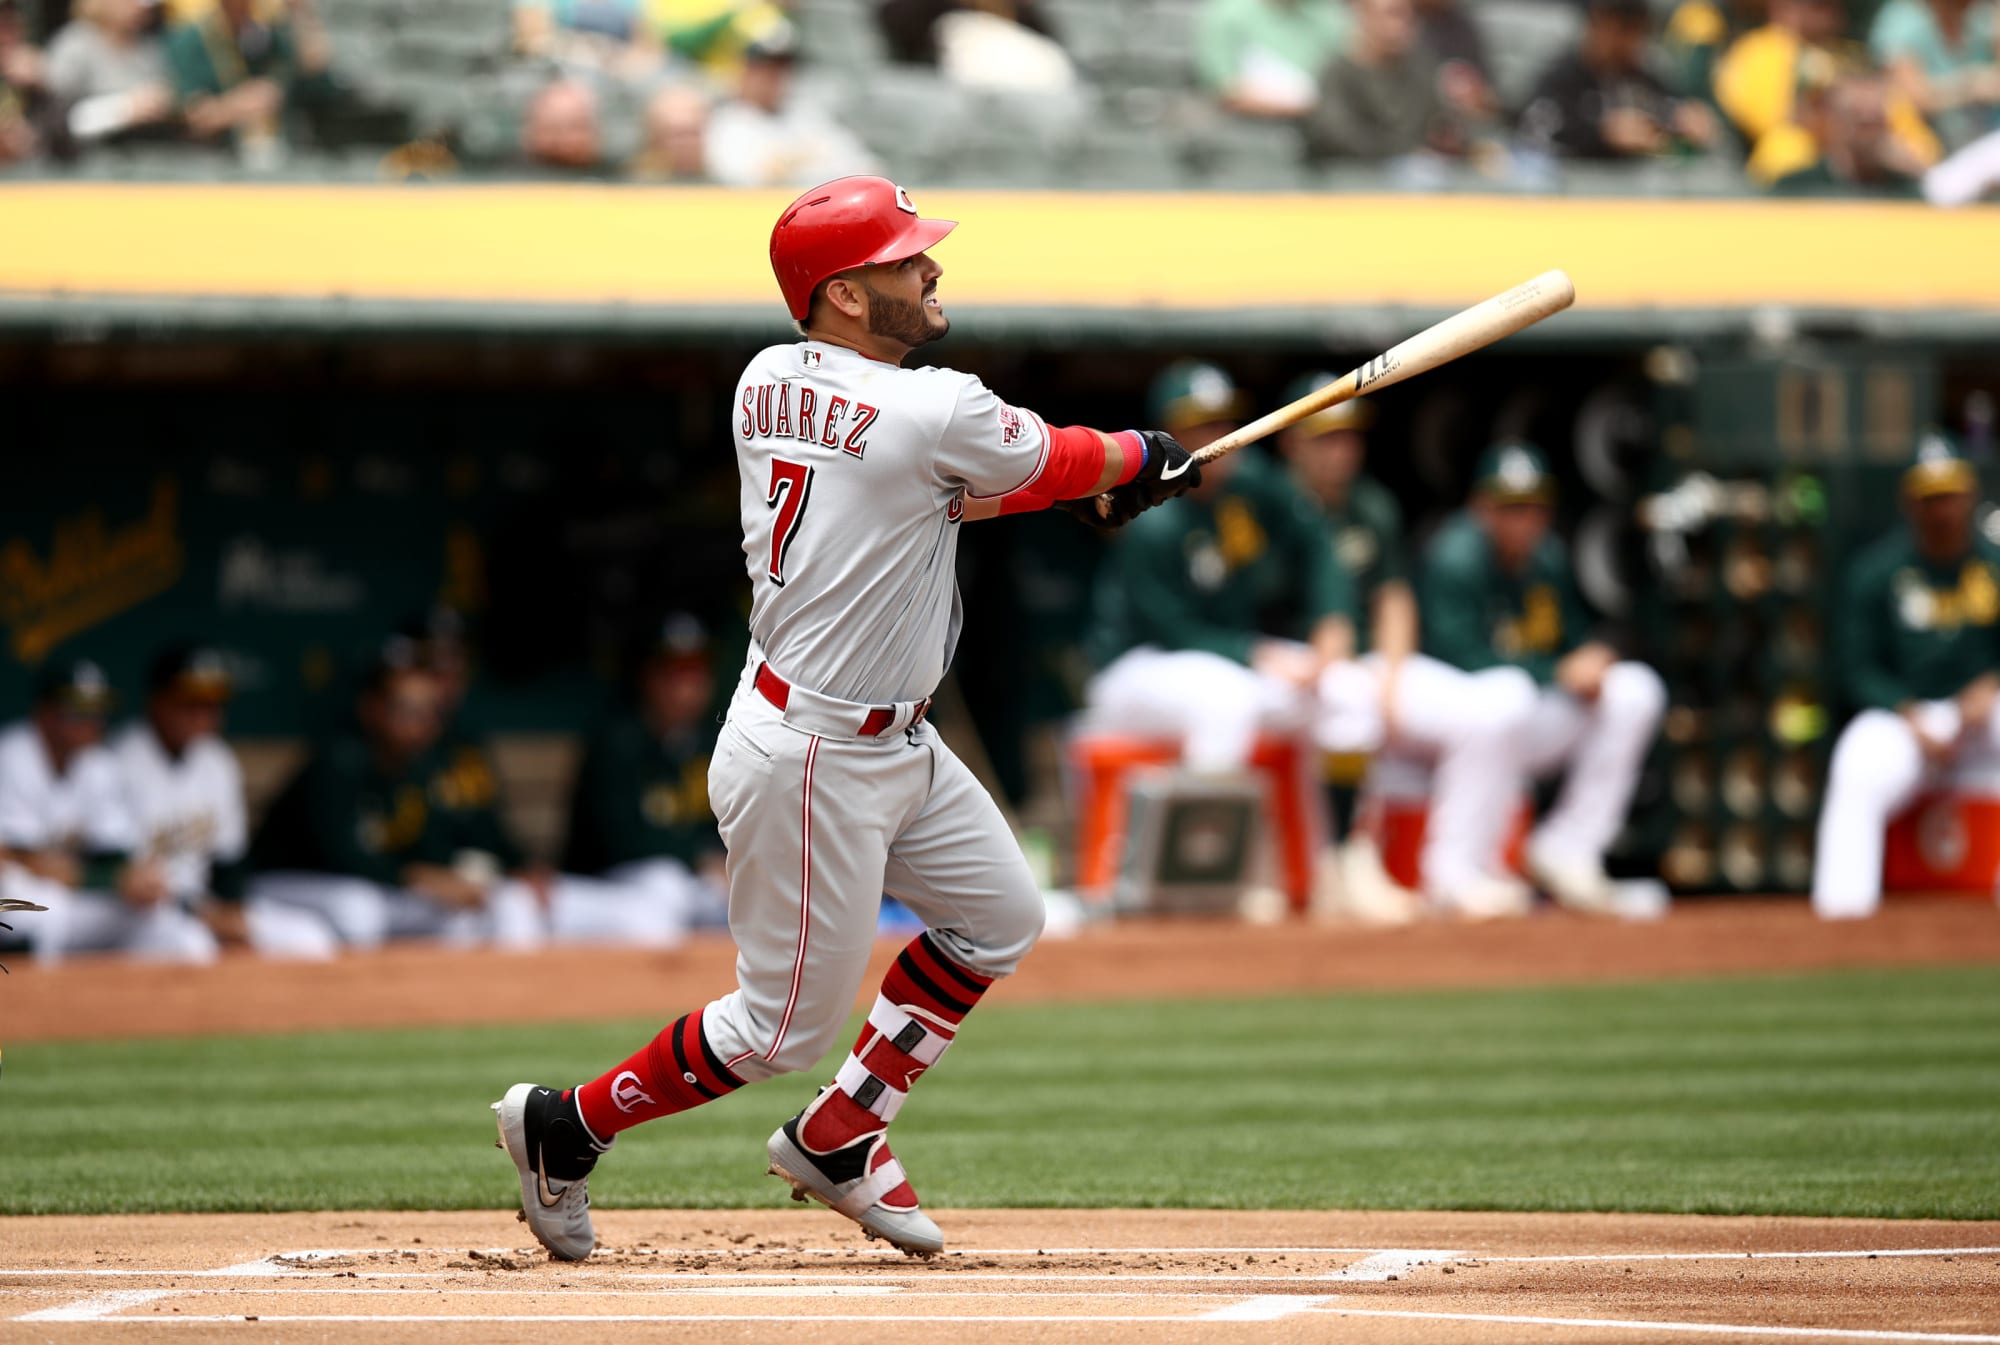 Cincinnati Reds: The win-loss record tells an incomplete story